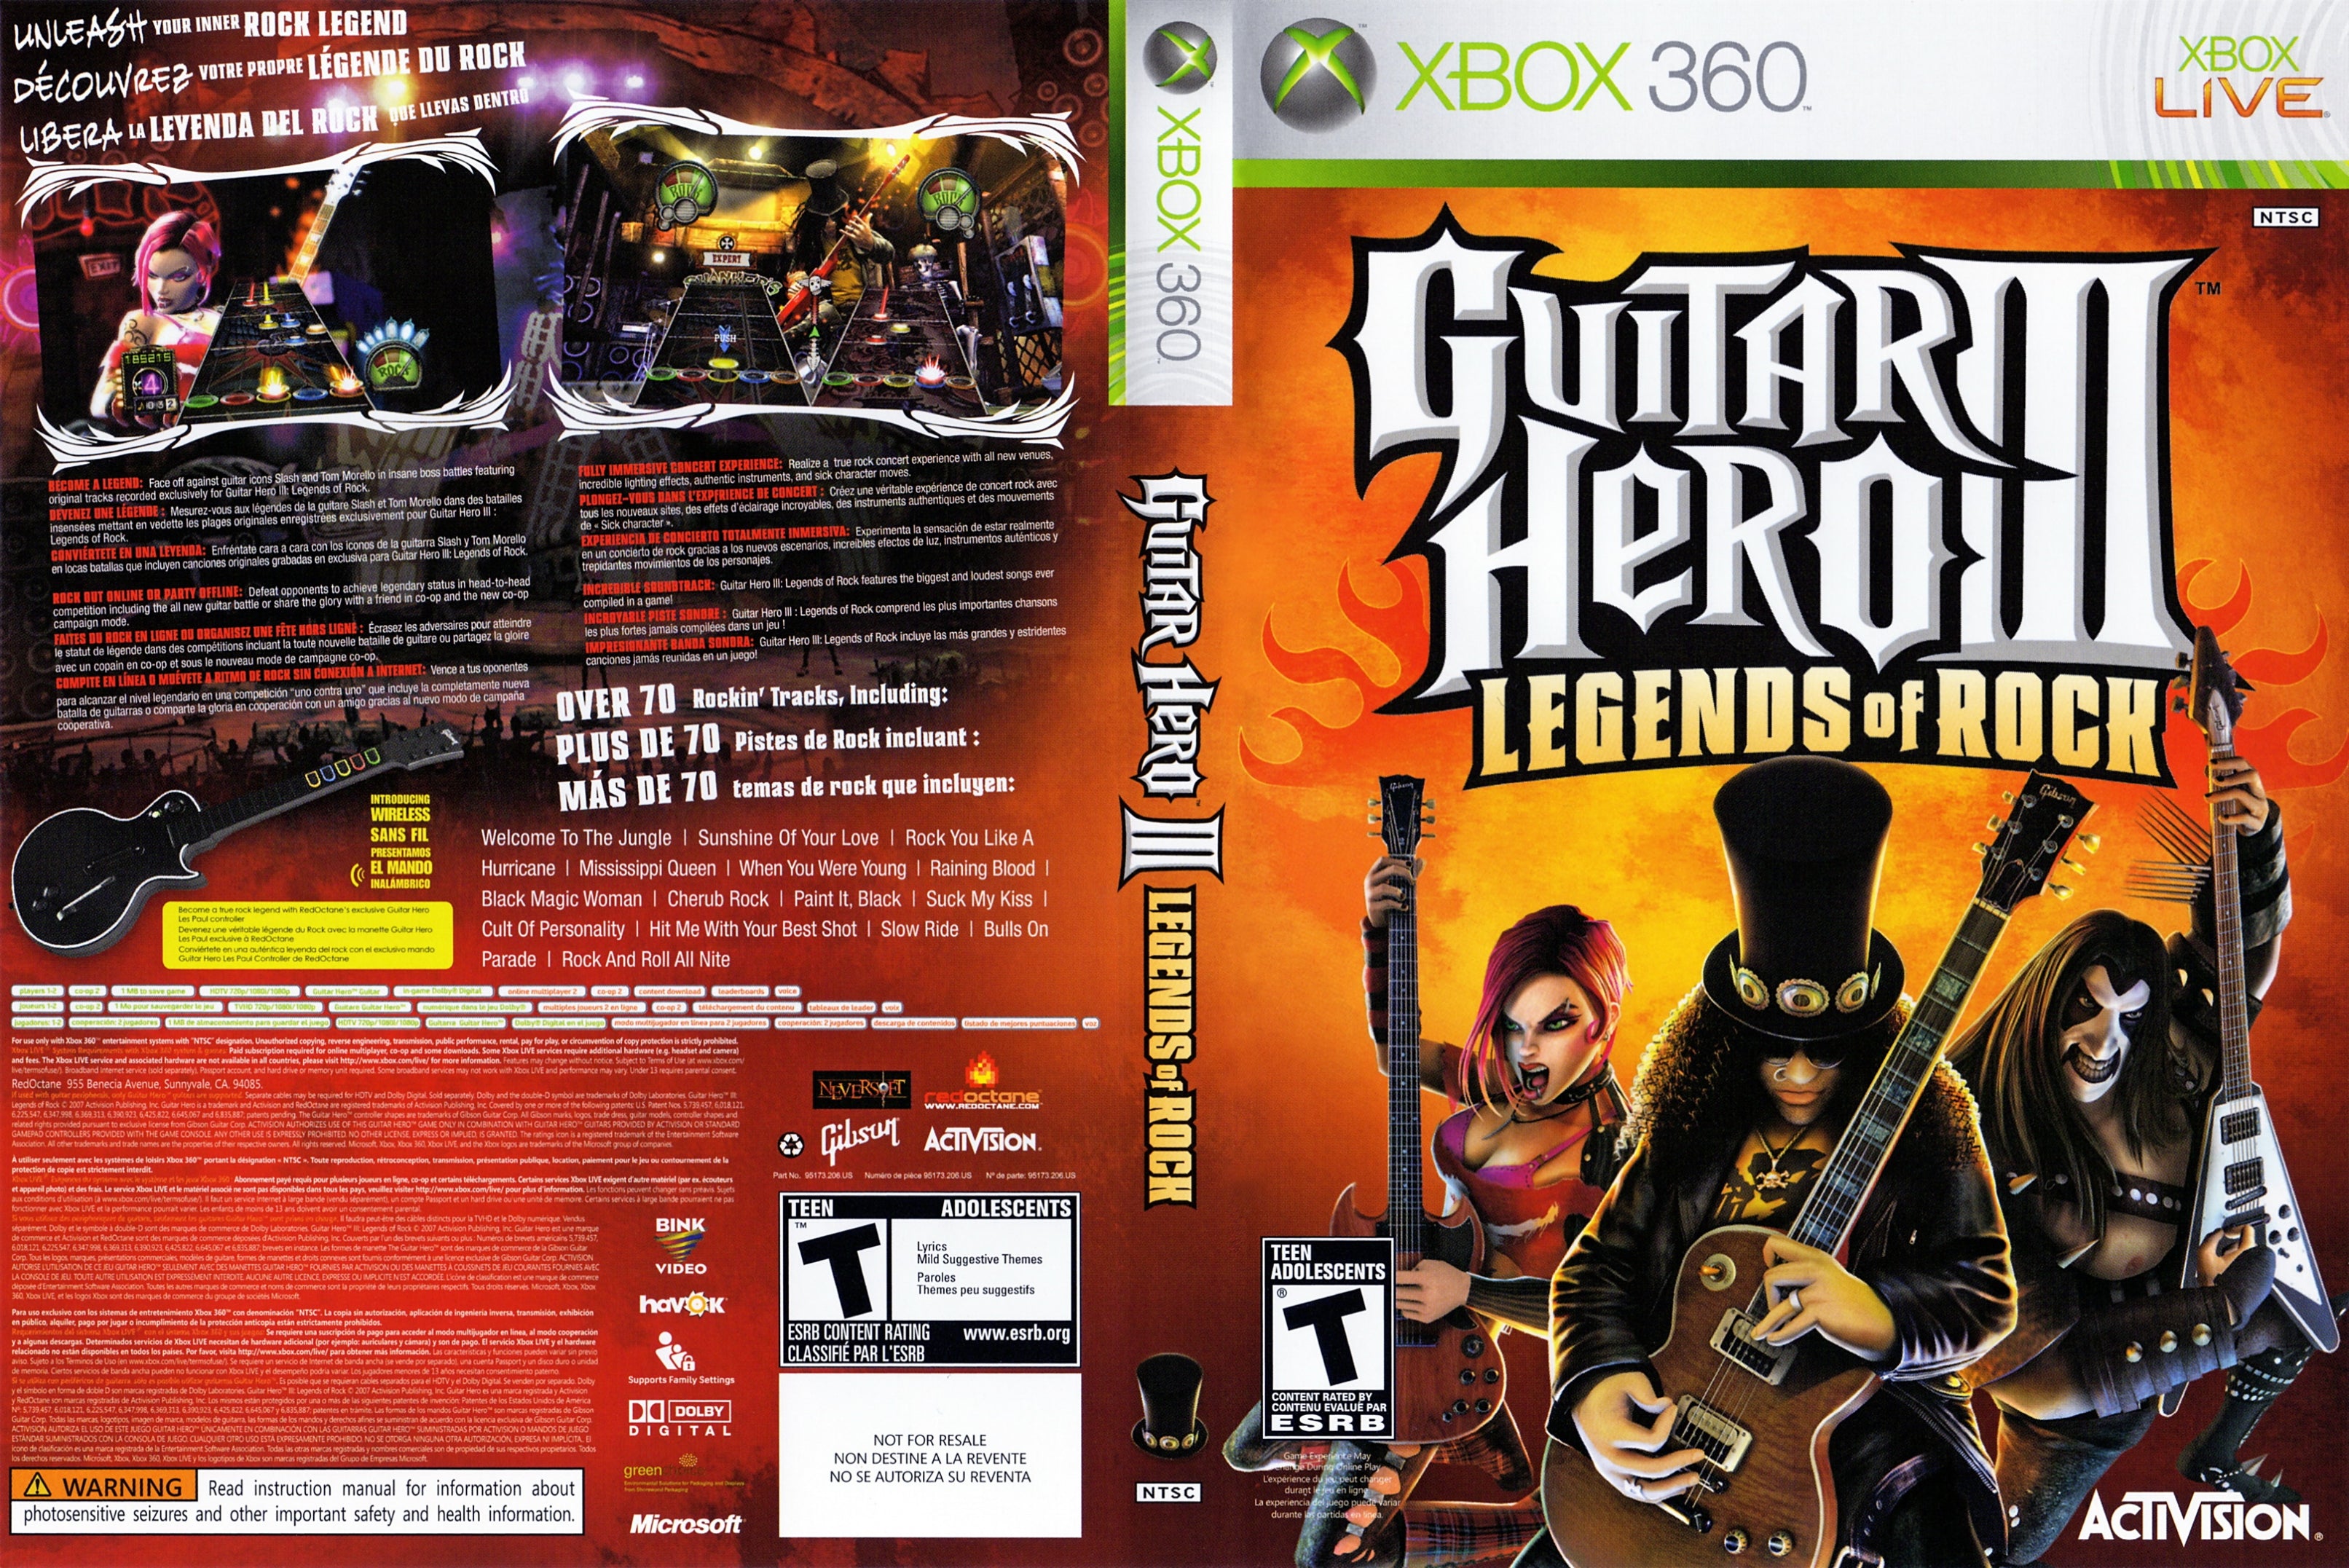 Guitar Hero 3: Legends of Rock (Game Only) - Xbox 360, Xbox 360